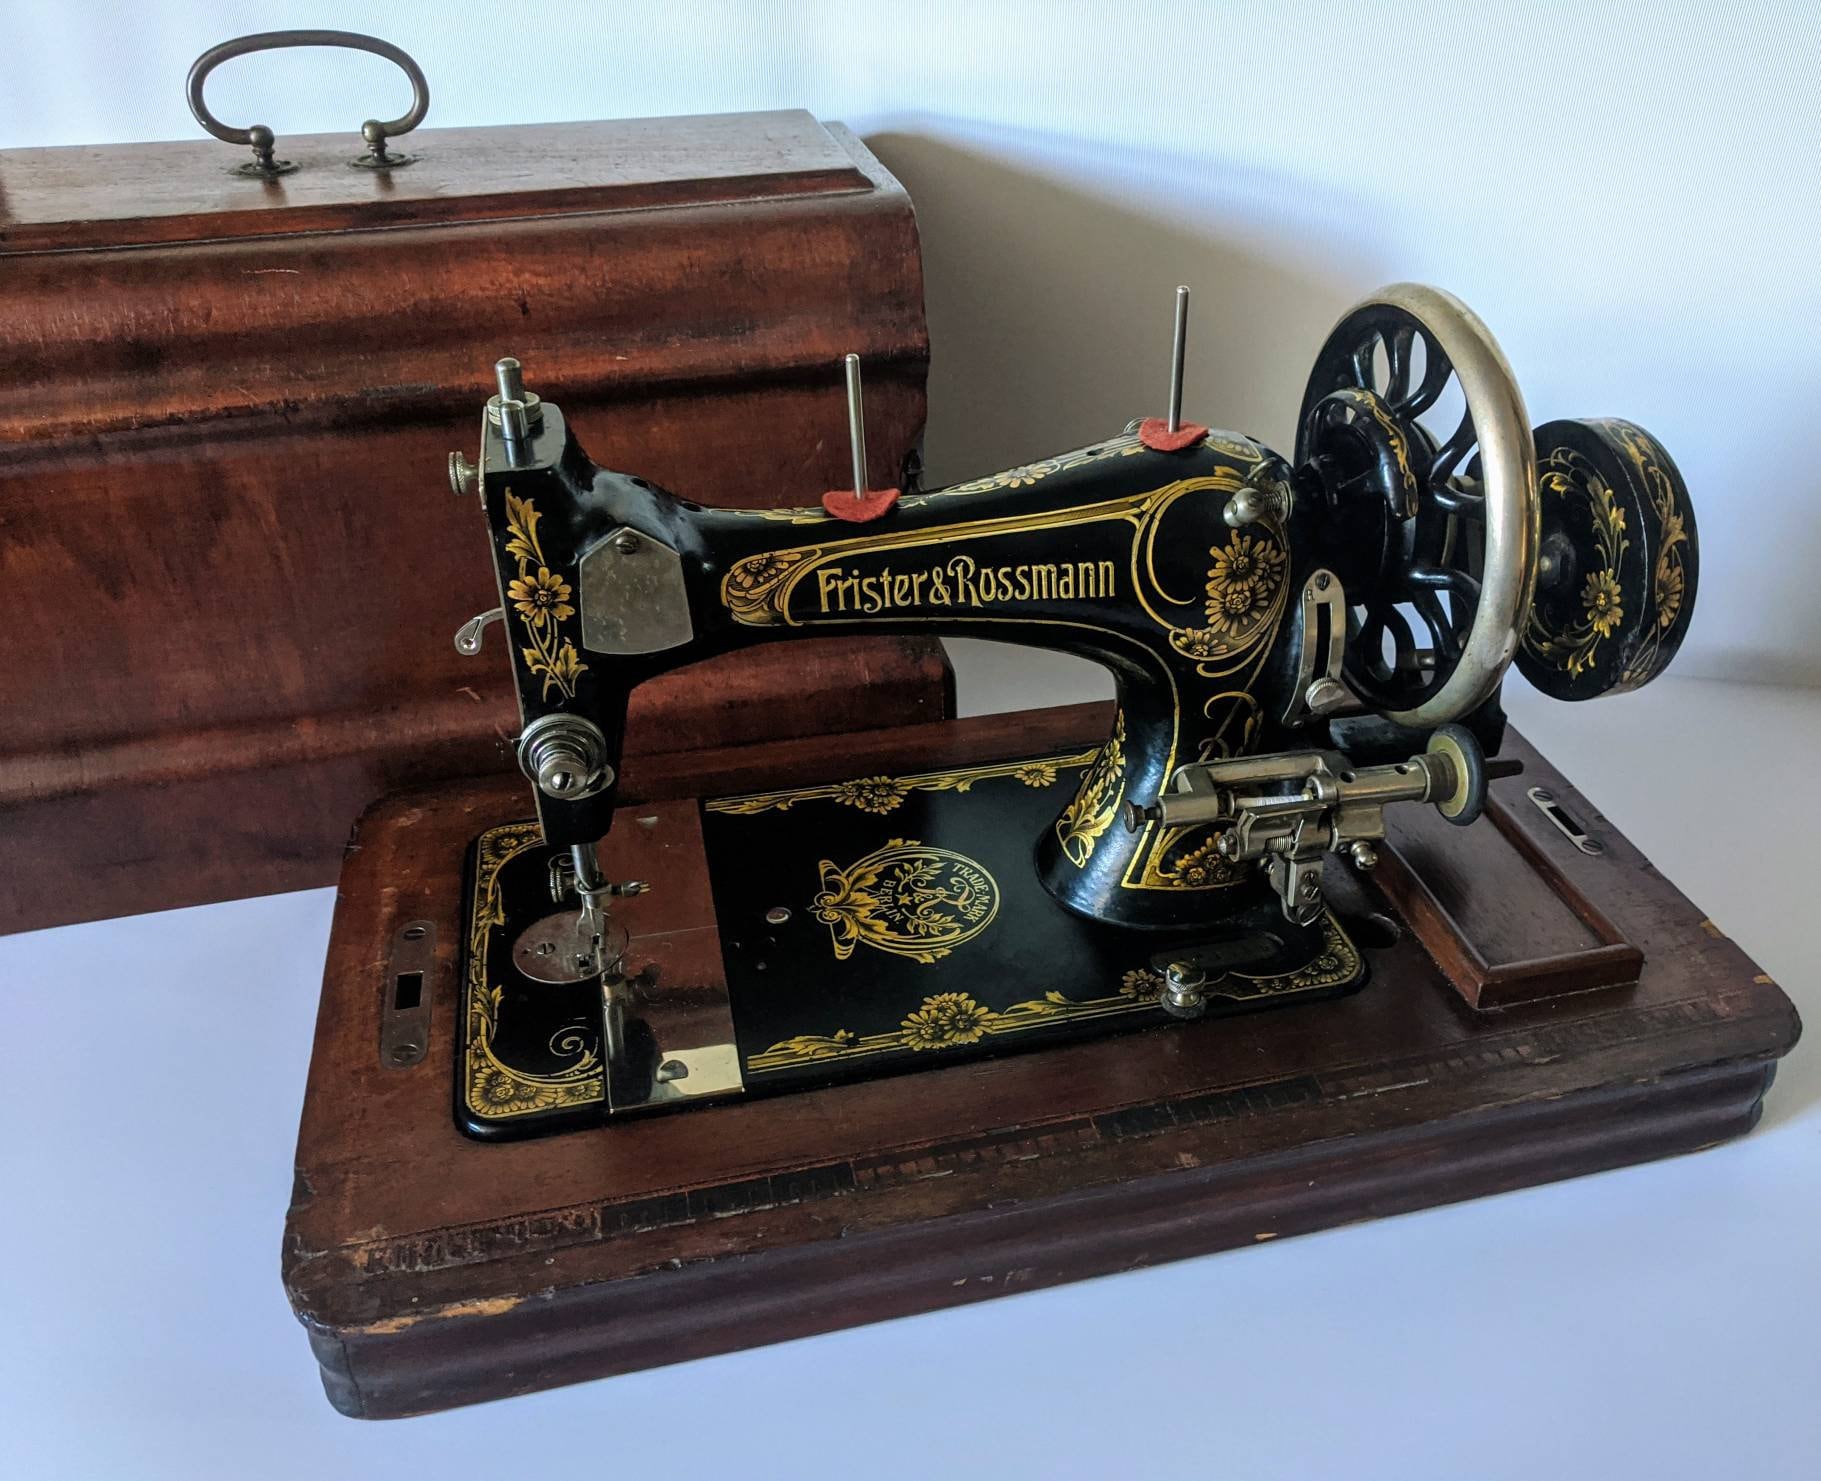 SINGER Sewing Machine Bentwood Wooden Carrying Case for 15 15-91 201 201-2  66 316 127 27 Restored by 3FTERS 